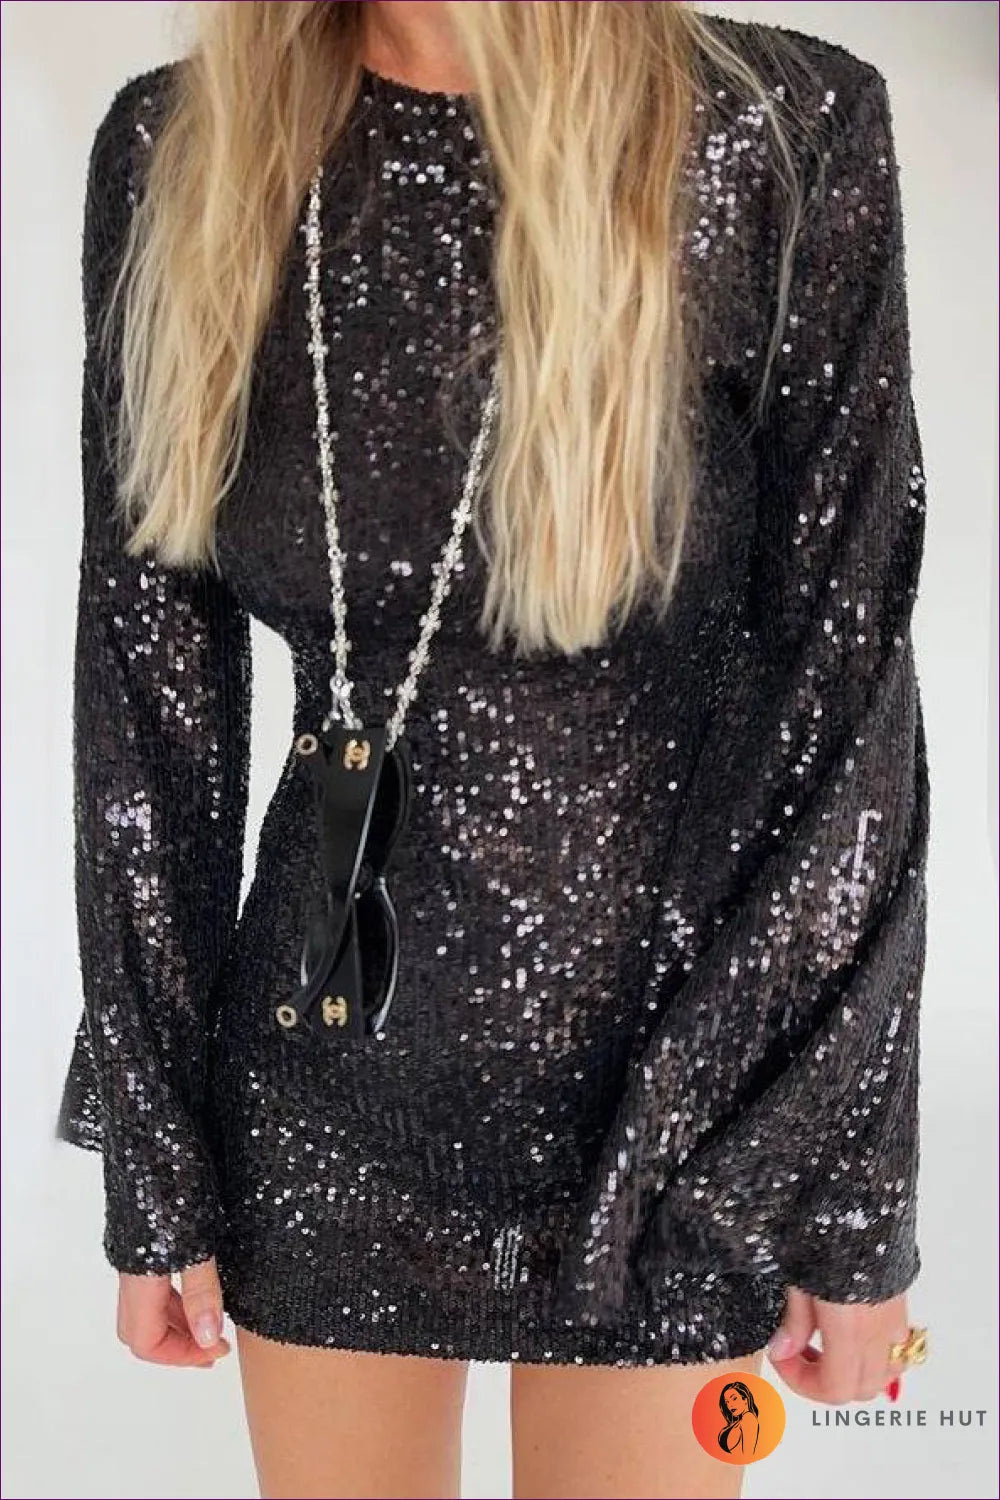 Embrace The Cooler Seasons With a Dress That Reflects Your Inner Shine. The Autumn Winter Sequined Flare